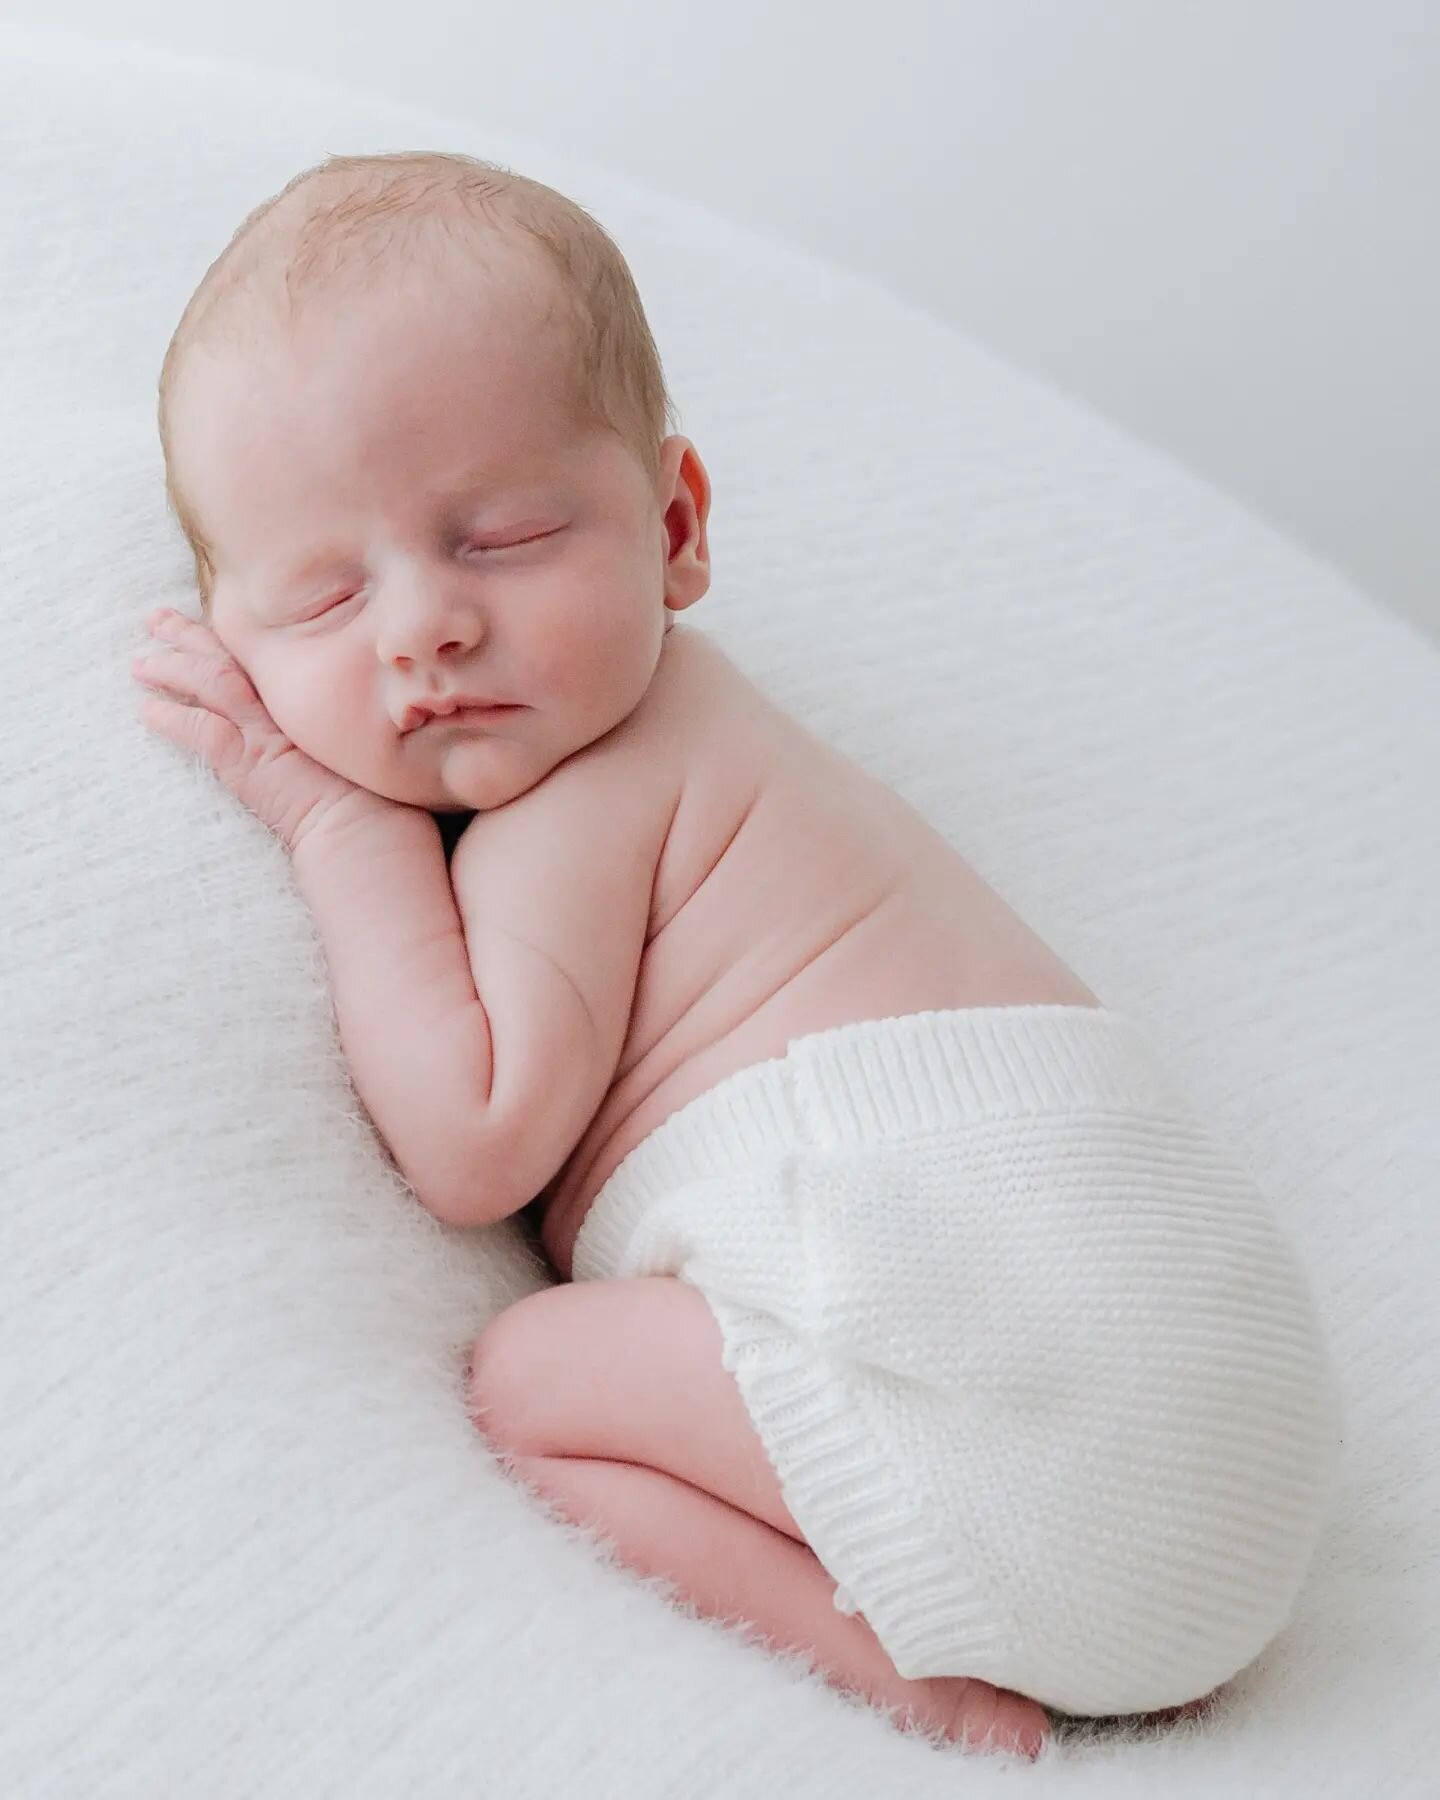 Just look at them squishy rolls 😍

#newbornphotoshoot #newbornphotography #newbornphotographer #londonphotographer #surreynewbornphotographer #cobham #coulsdon #banstead #epsomphotographer #dorking #canditphoto #ashtead #Reigate #nork #cheam #cheamv